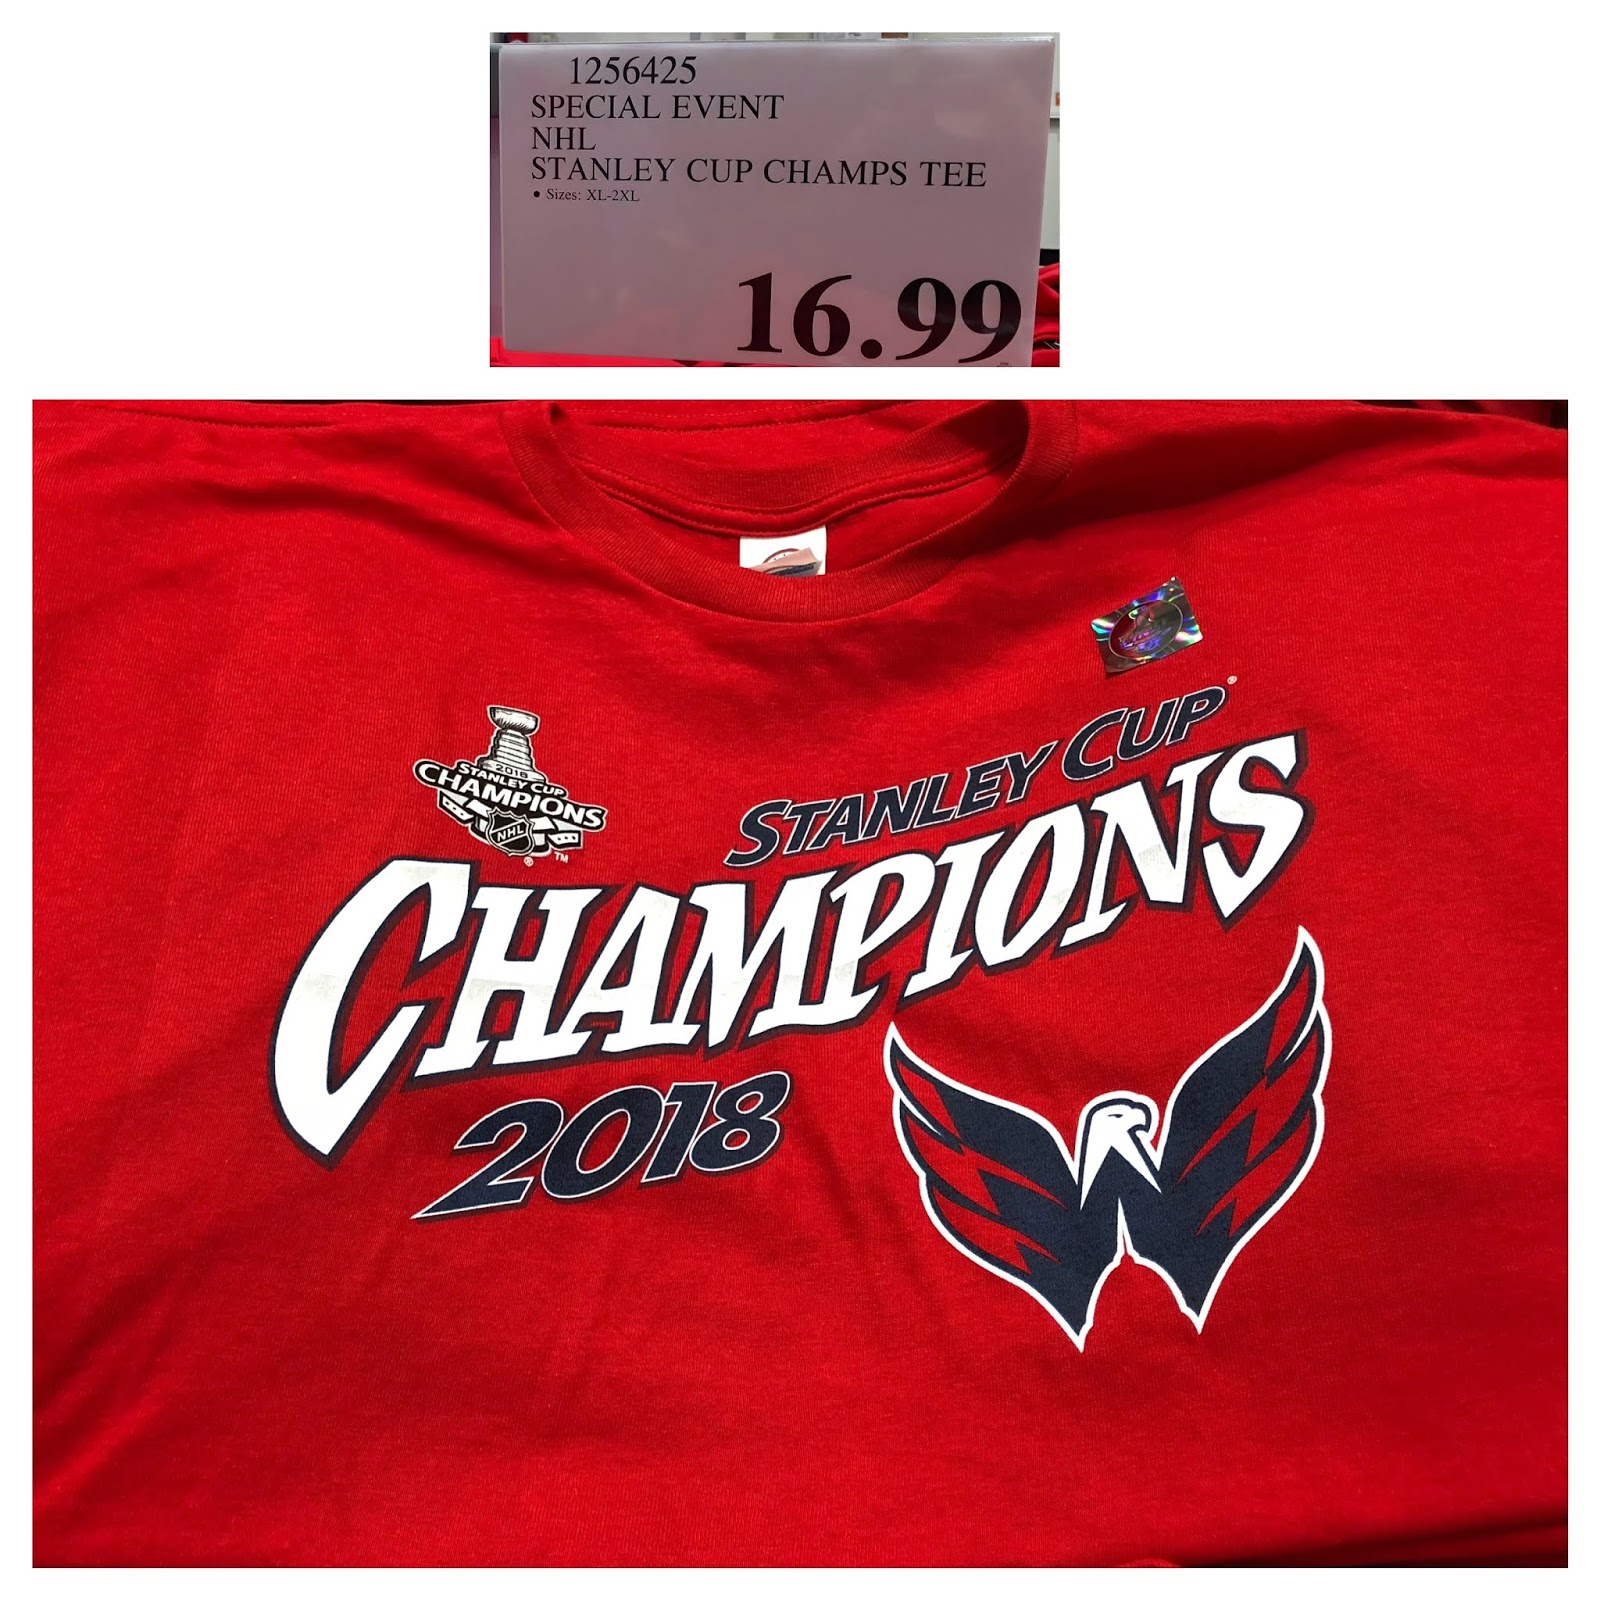 Men's Fanatics Branded Red Washington Capitals 2018 Stanley Cup Champions  Jersey Roster T-Shirt